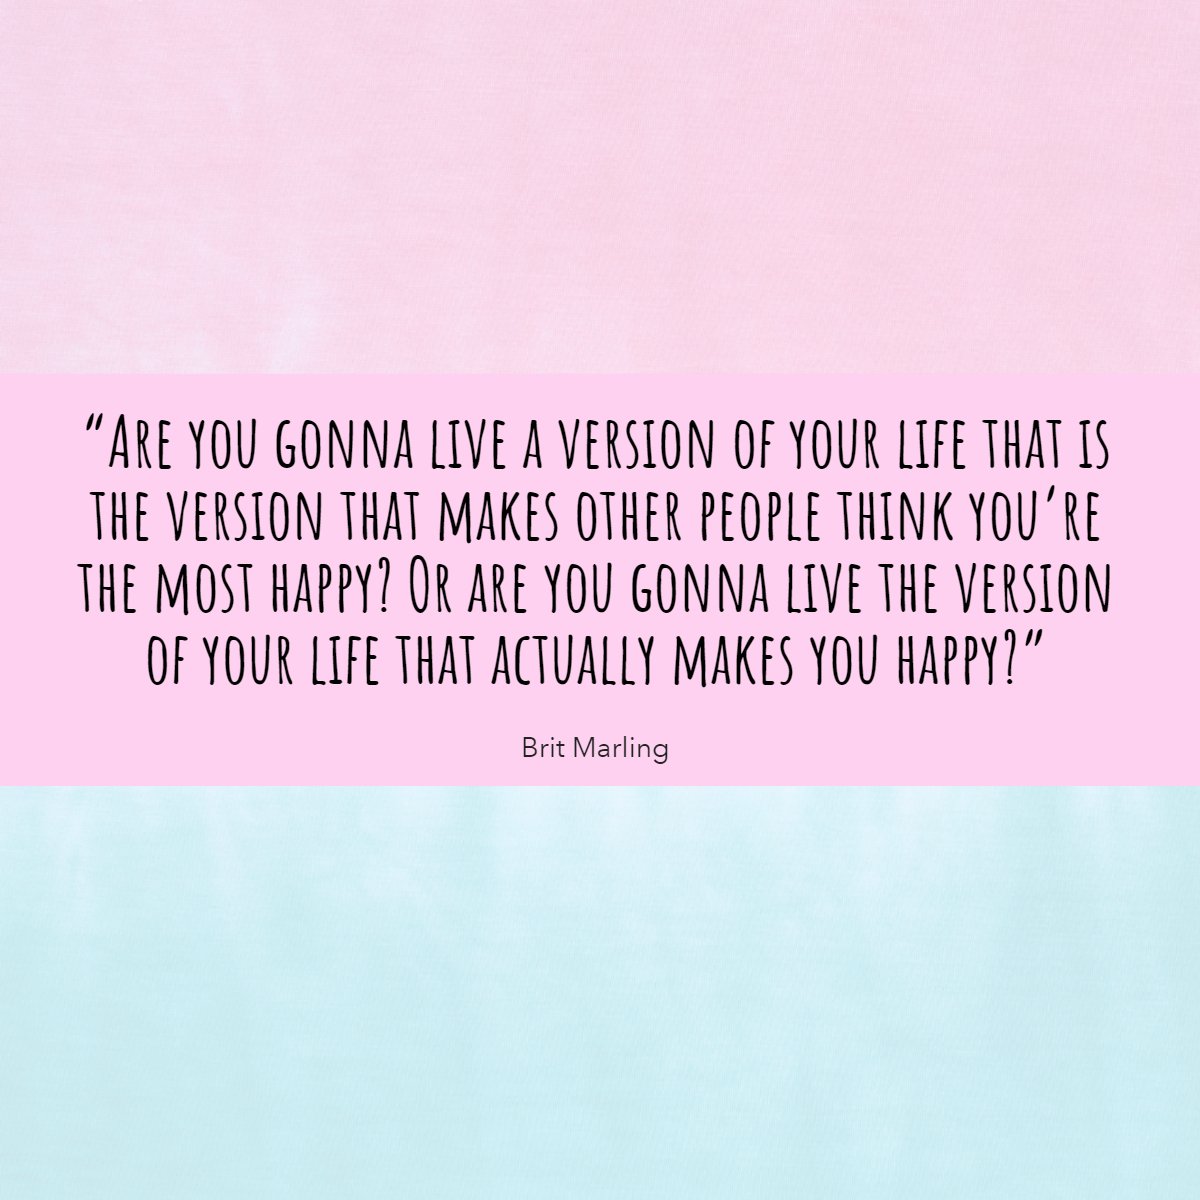 “Are you gonna live a version of your life that is the version that makes other people think you’re the most happy? Or are you gonna live the version of your life that actually makes you happy?”

- Brit Marling

#yourbestlife #yourchoice #live #livewhileweareyoung